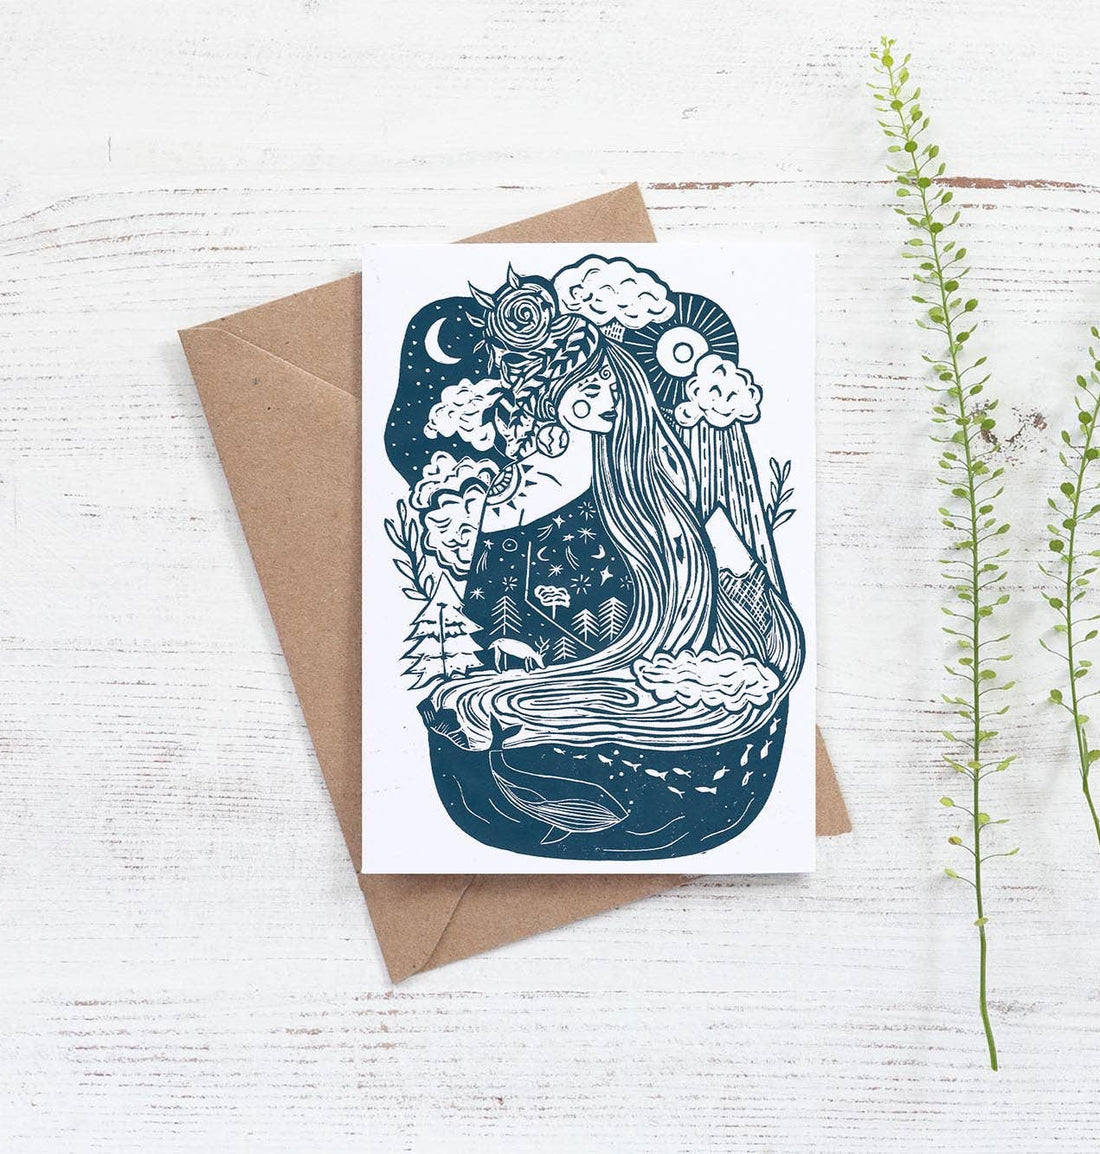 Prints by the Bay - Madre Tierra (Mother Earth) Card